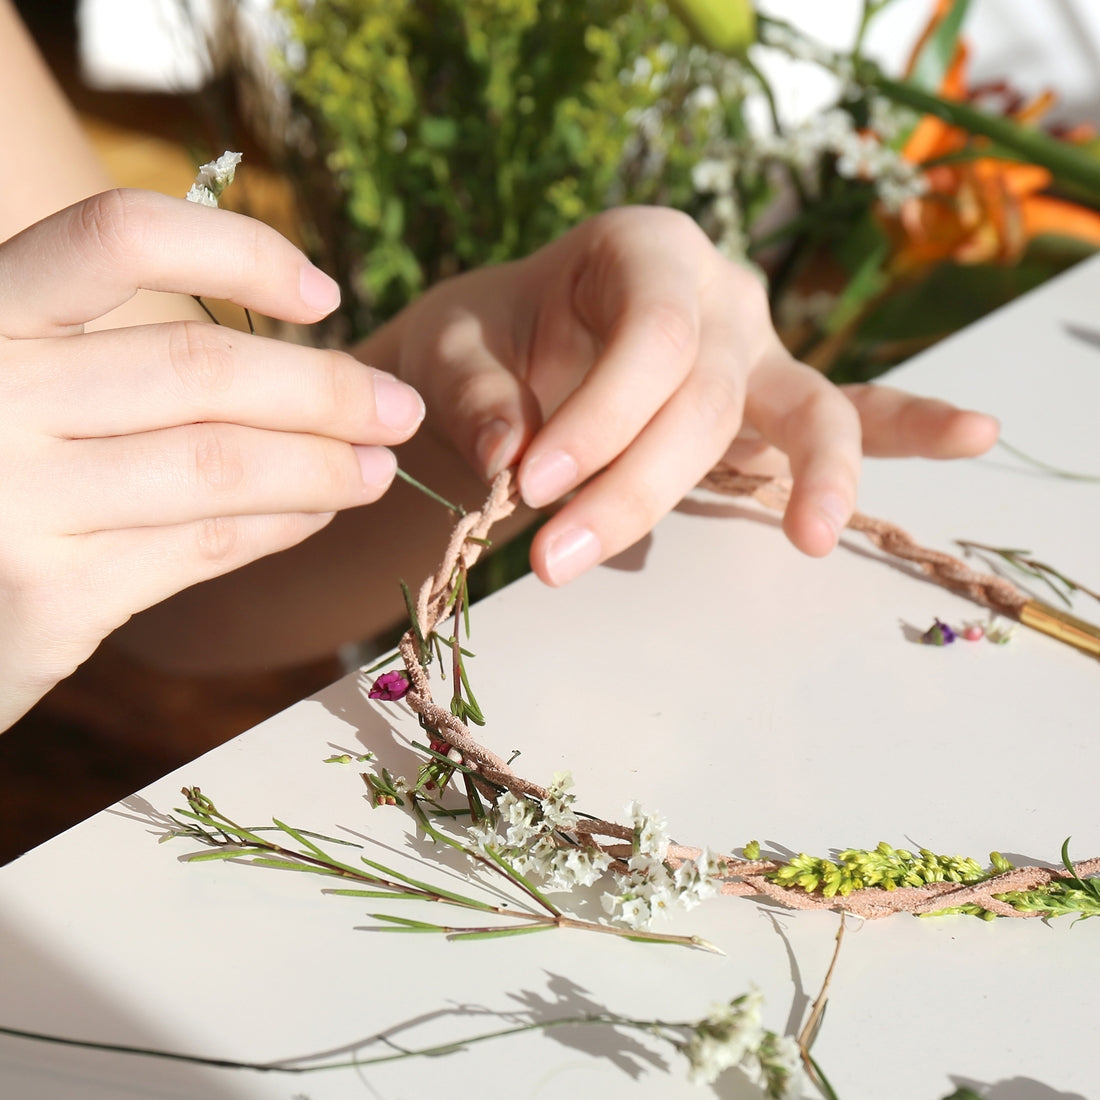 Make Your Own Fresh Flower Necklace